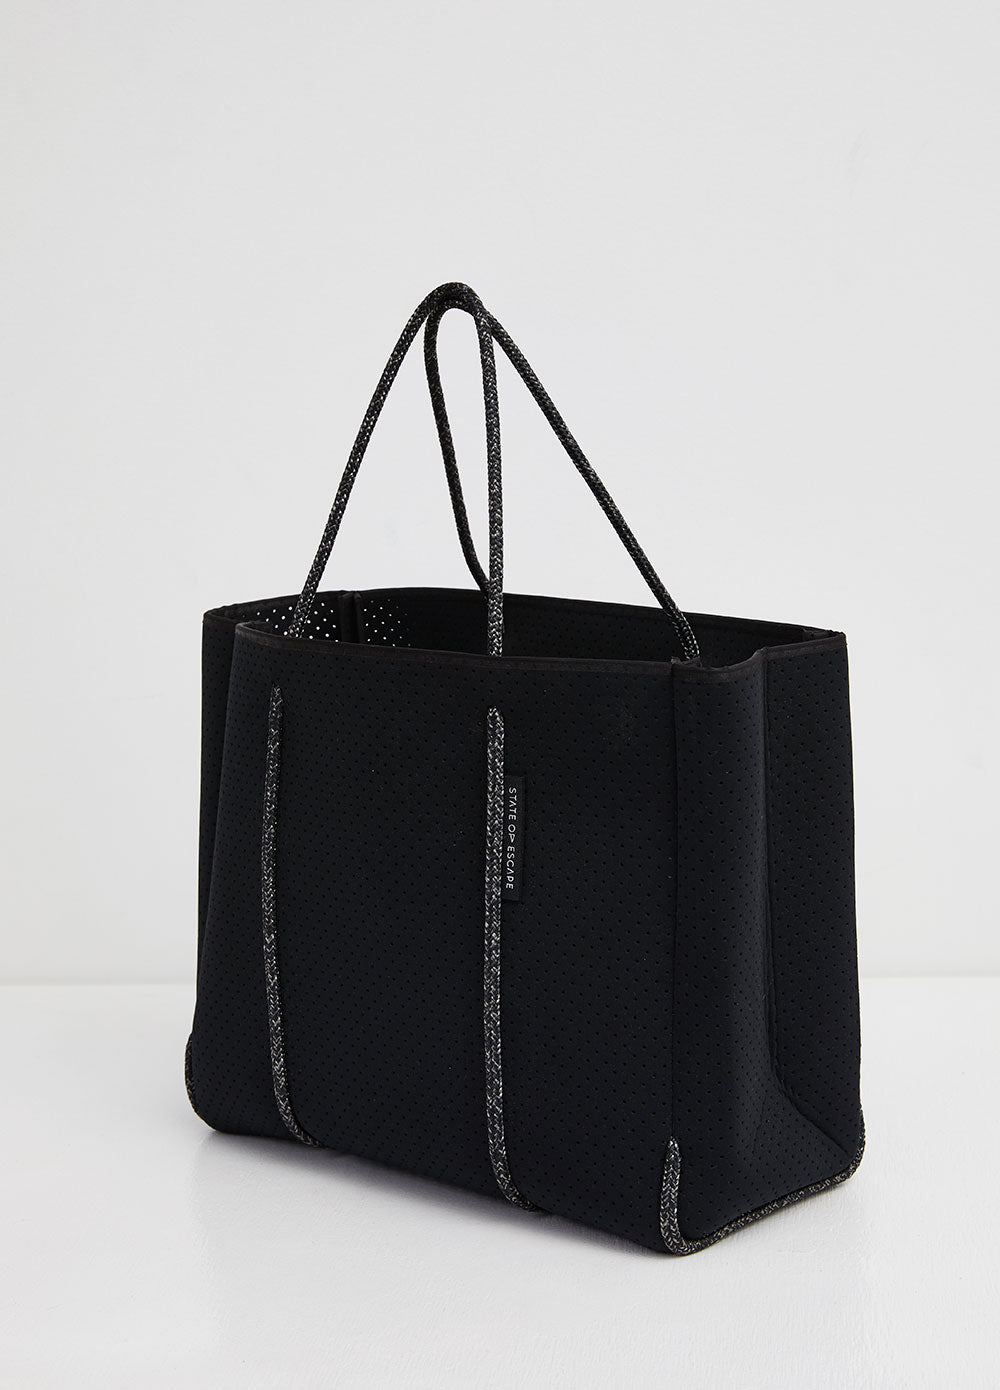 Flying Solo Tote